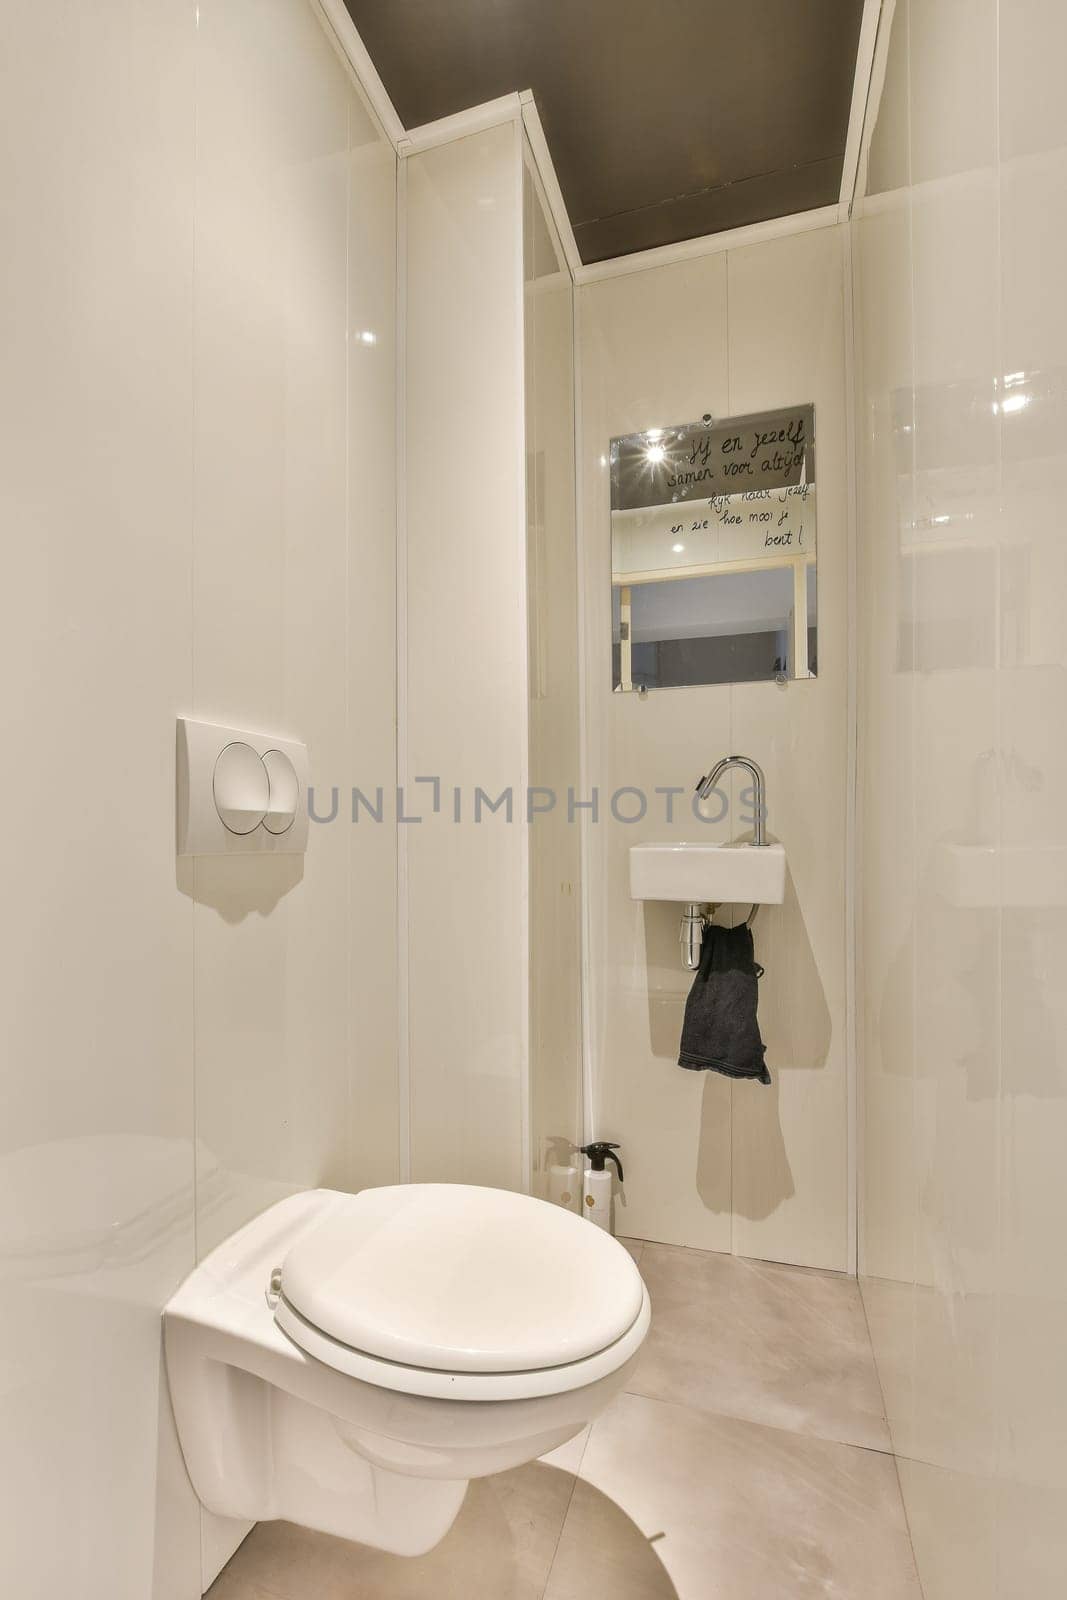 a white bathroom with a toilet and mirror in the shower stall, it appears to be used as a public restroom